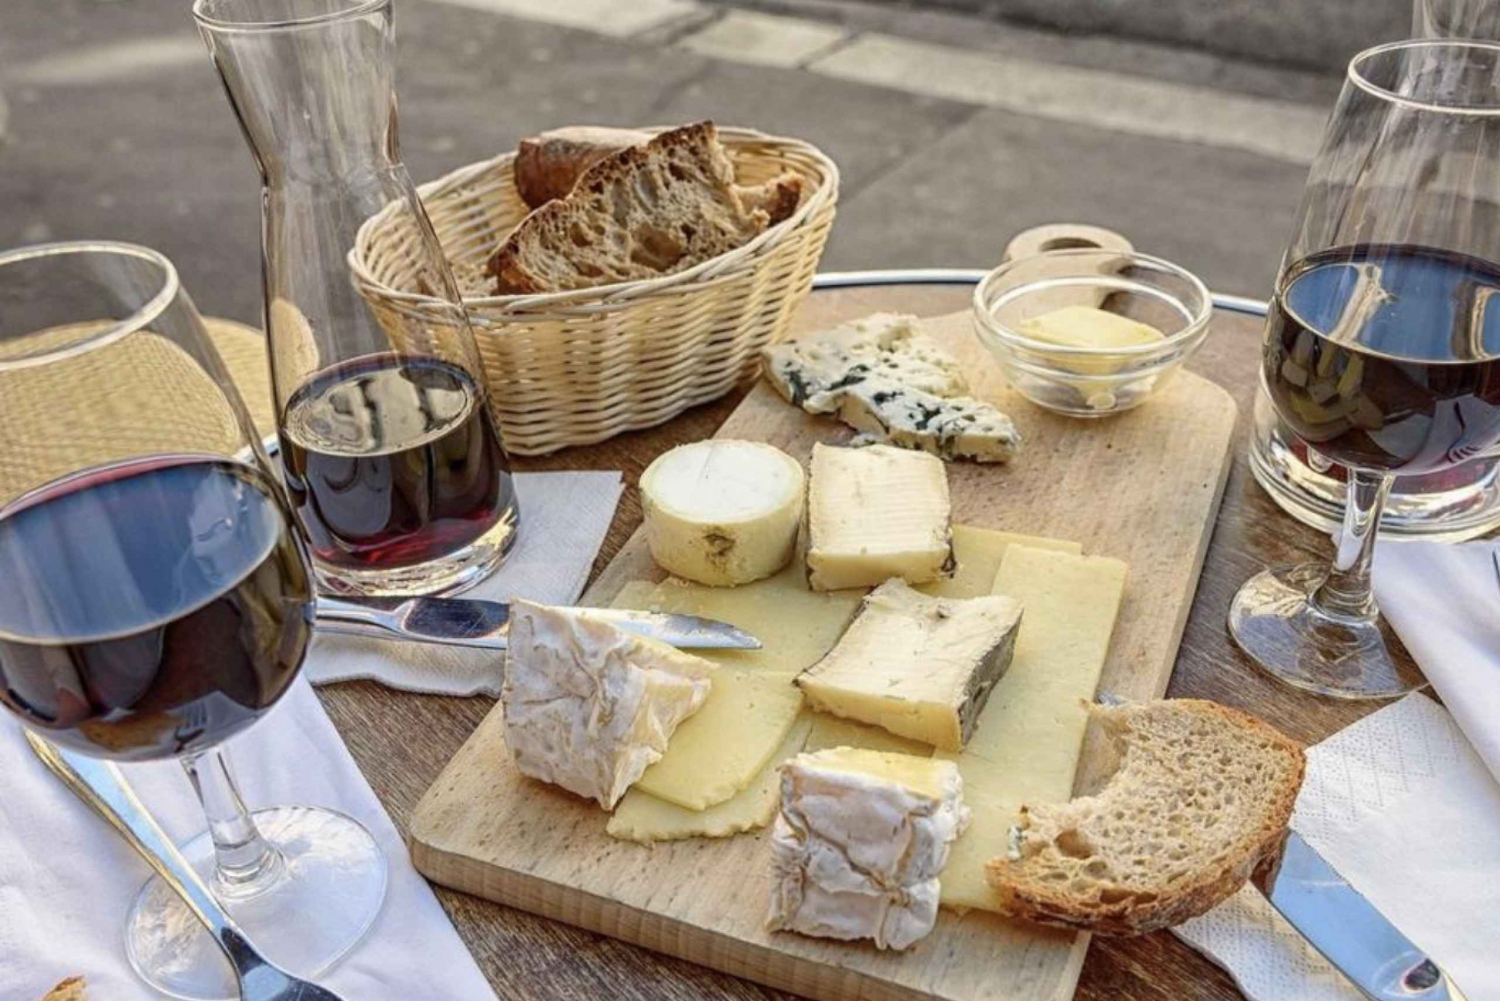 Bordeaux Private Food Tour - Cheese, Wine, Chocolate & more!